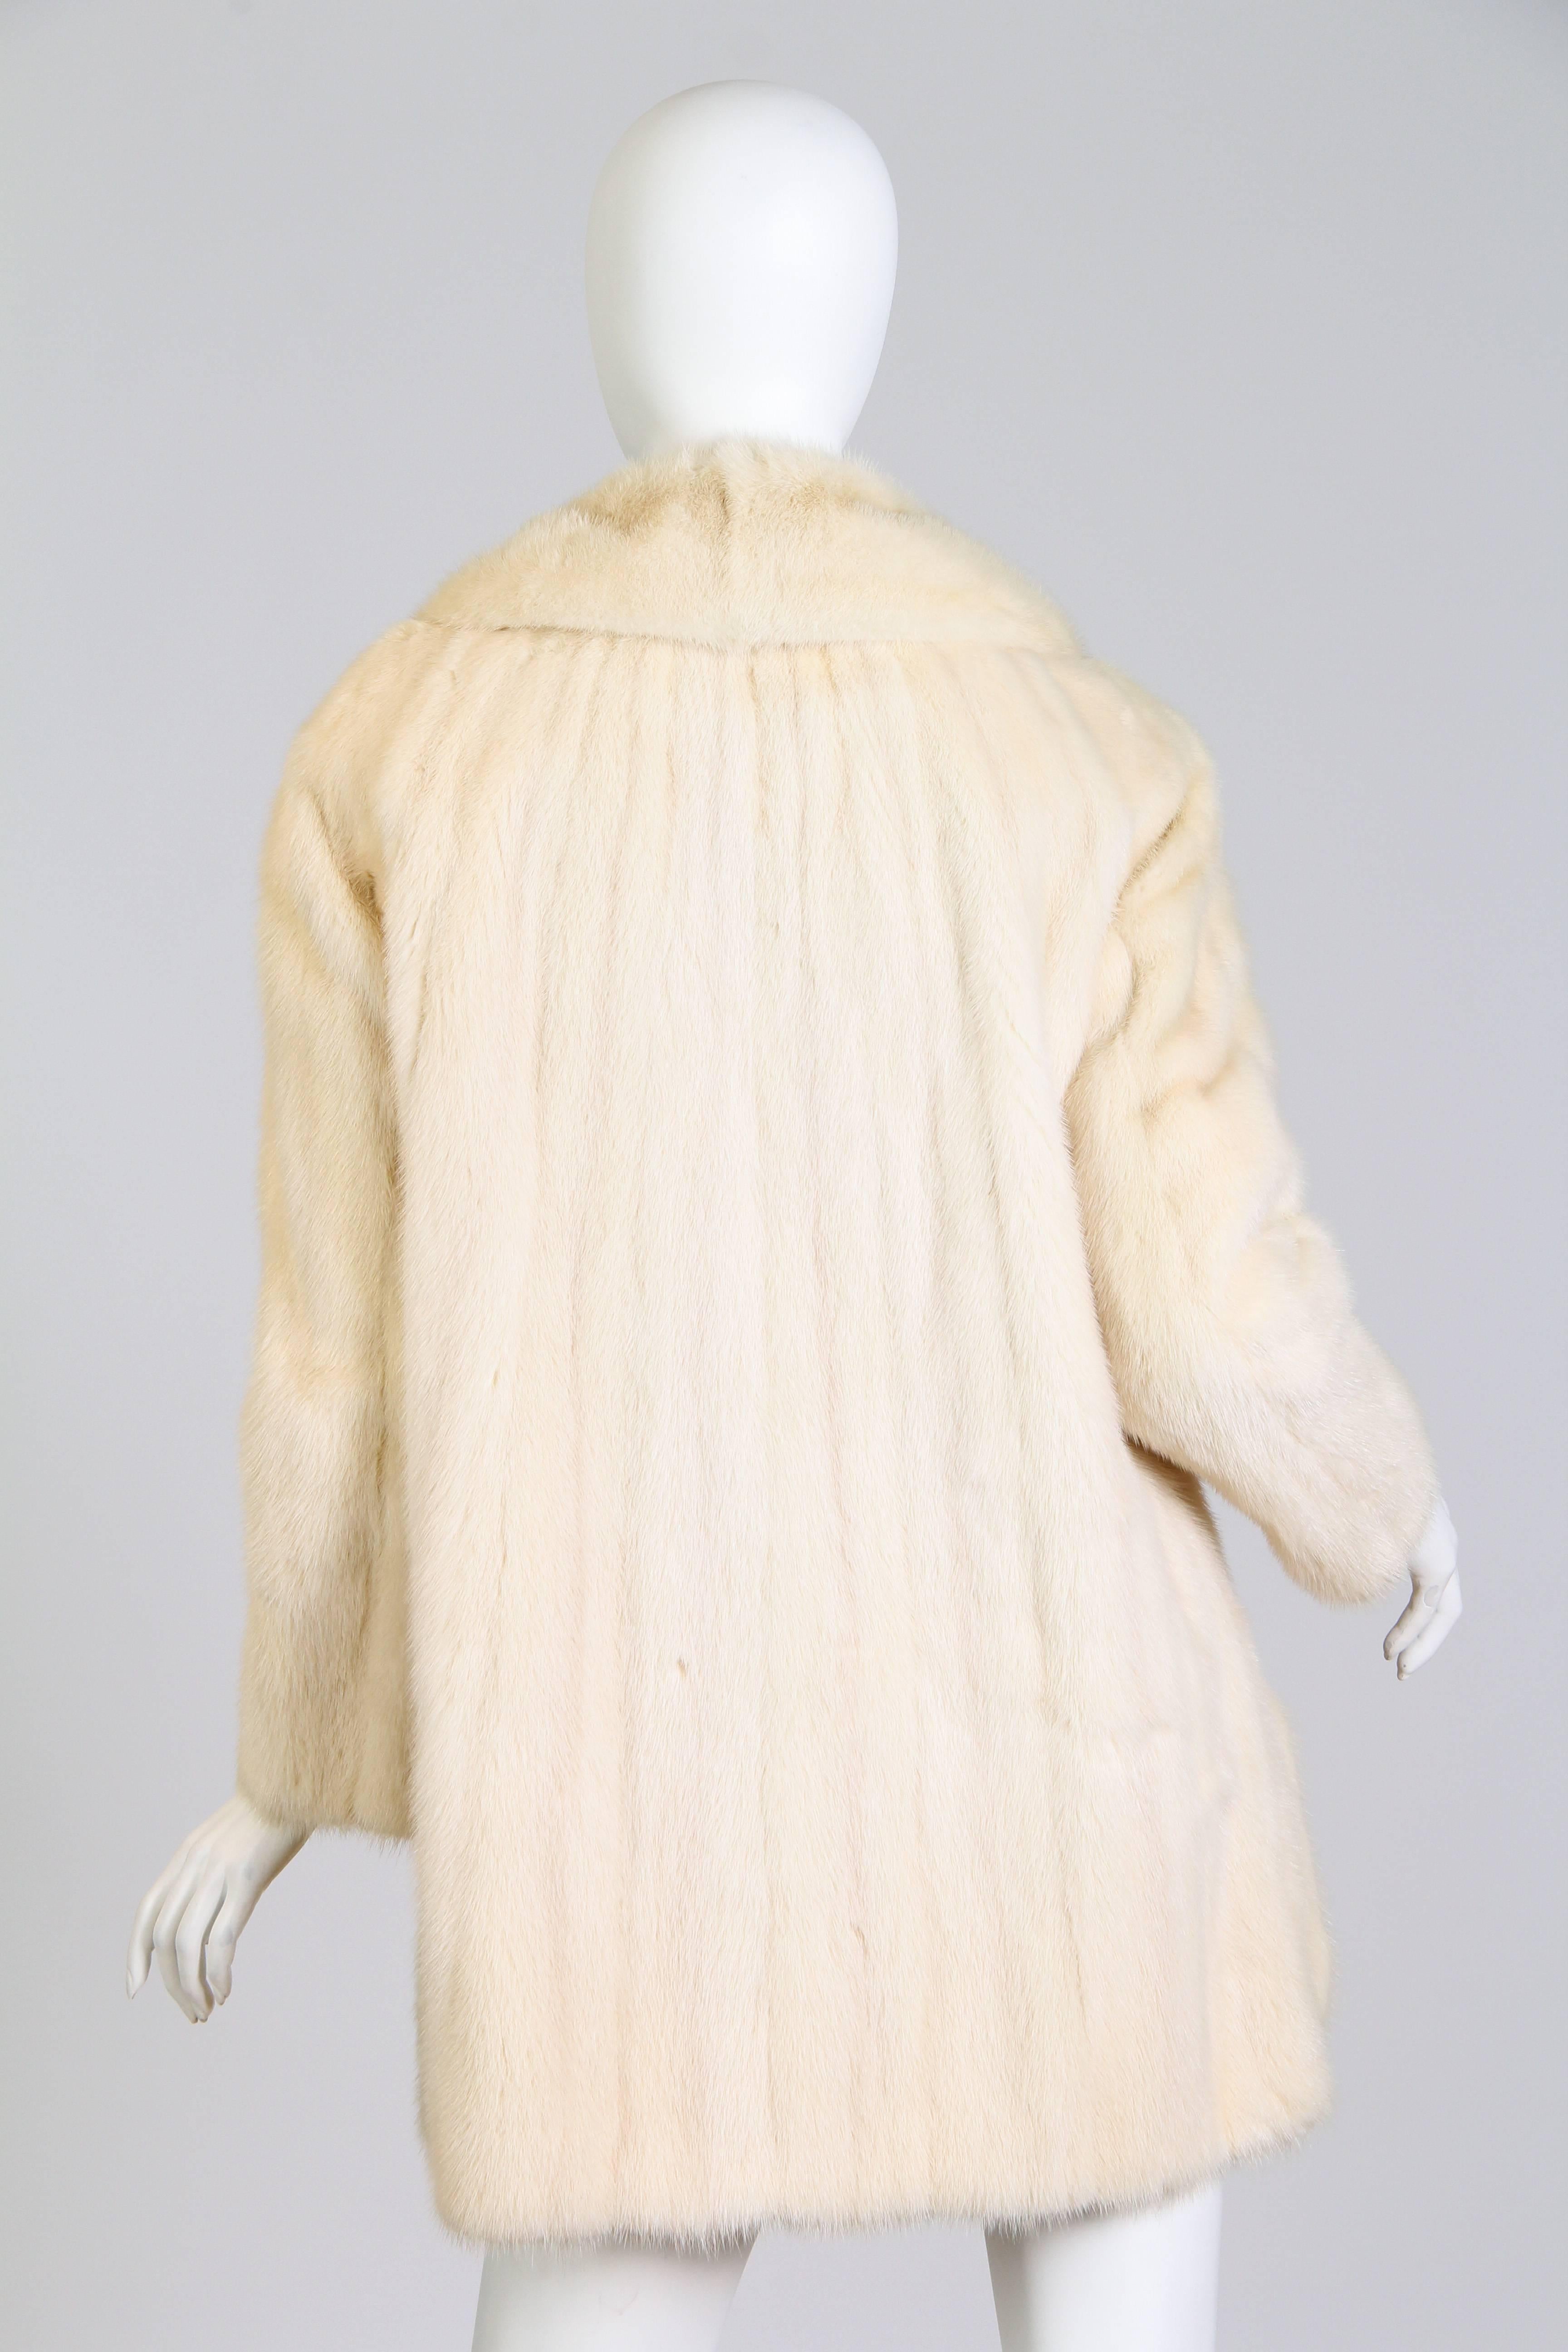 Bullocks Wilshire White Mink Coat In Excellent Condition In New York, NY